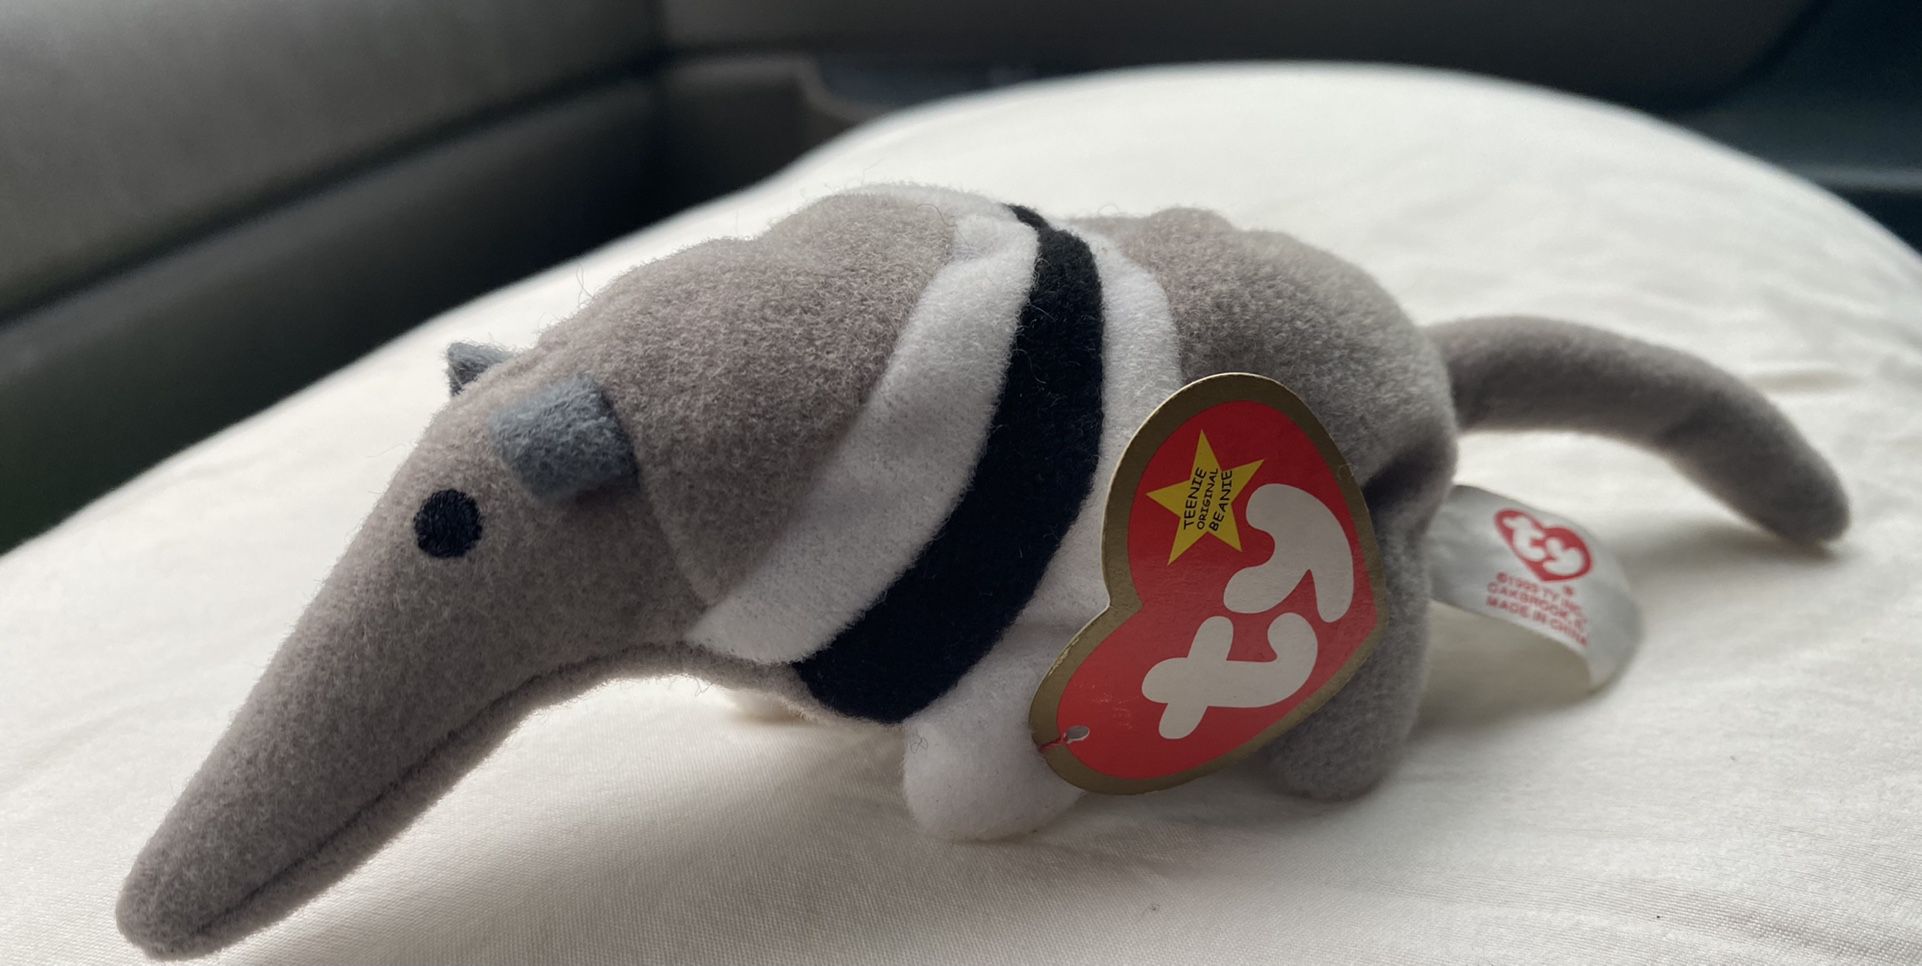 TY Teenie Beanie Babies Baby Antsy The Anteater 1993 McDonald’s Happy Meal Toy